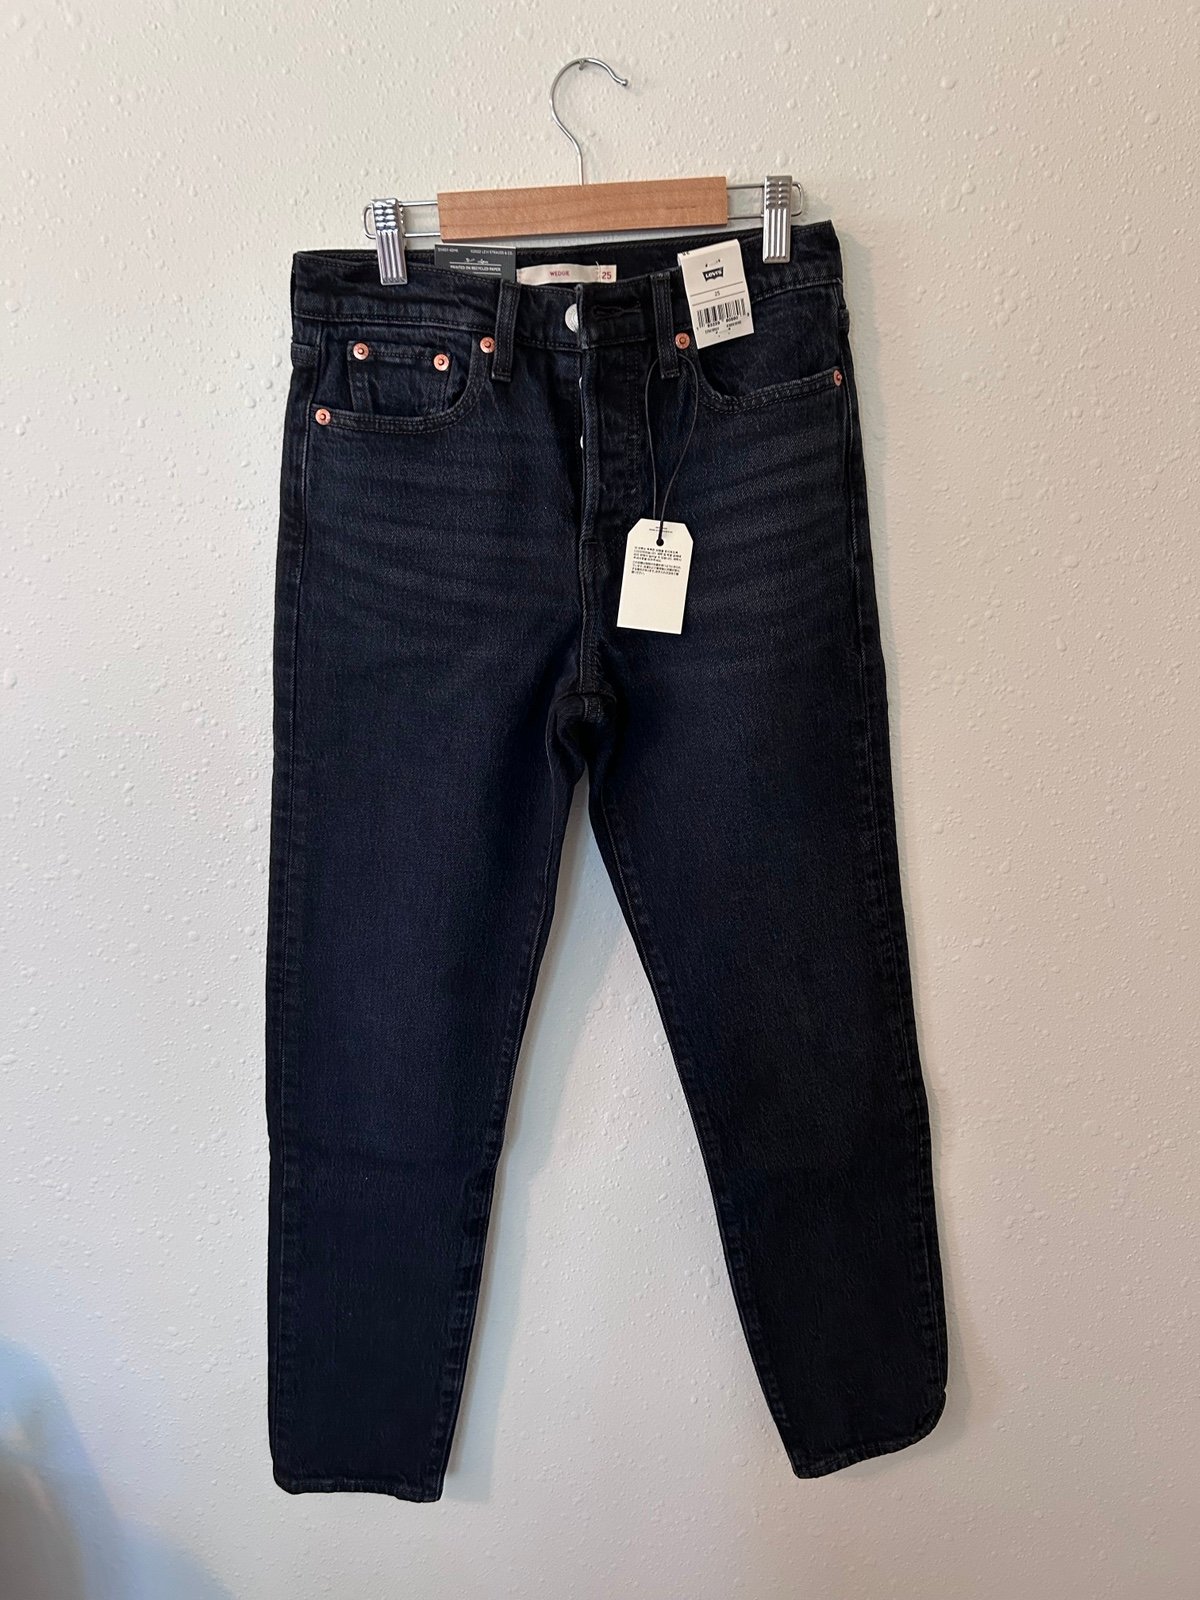 Wholesale price Levi’s Jeans OQdmq3QW3 New Style